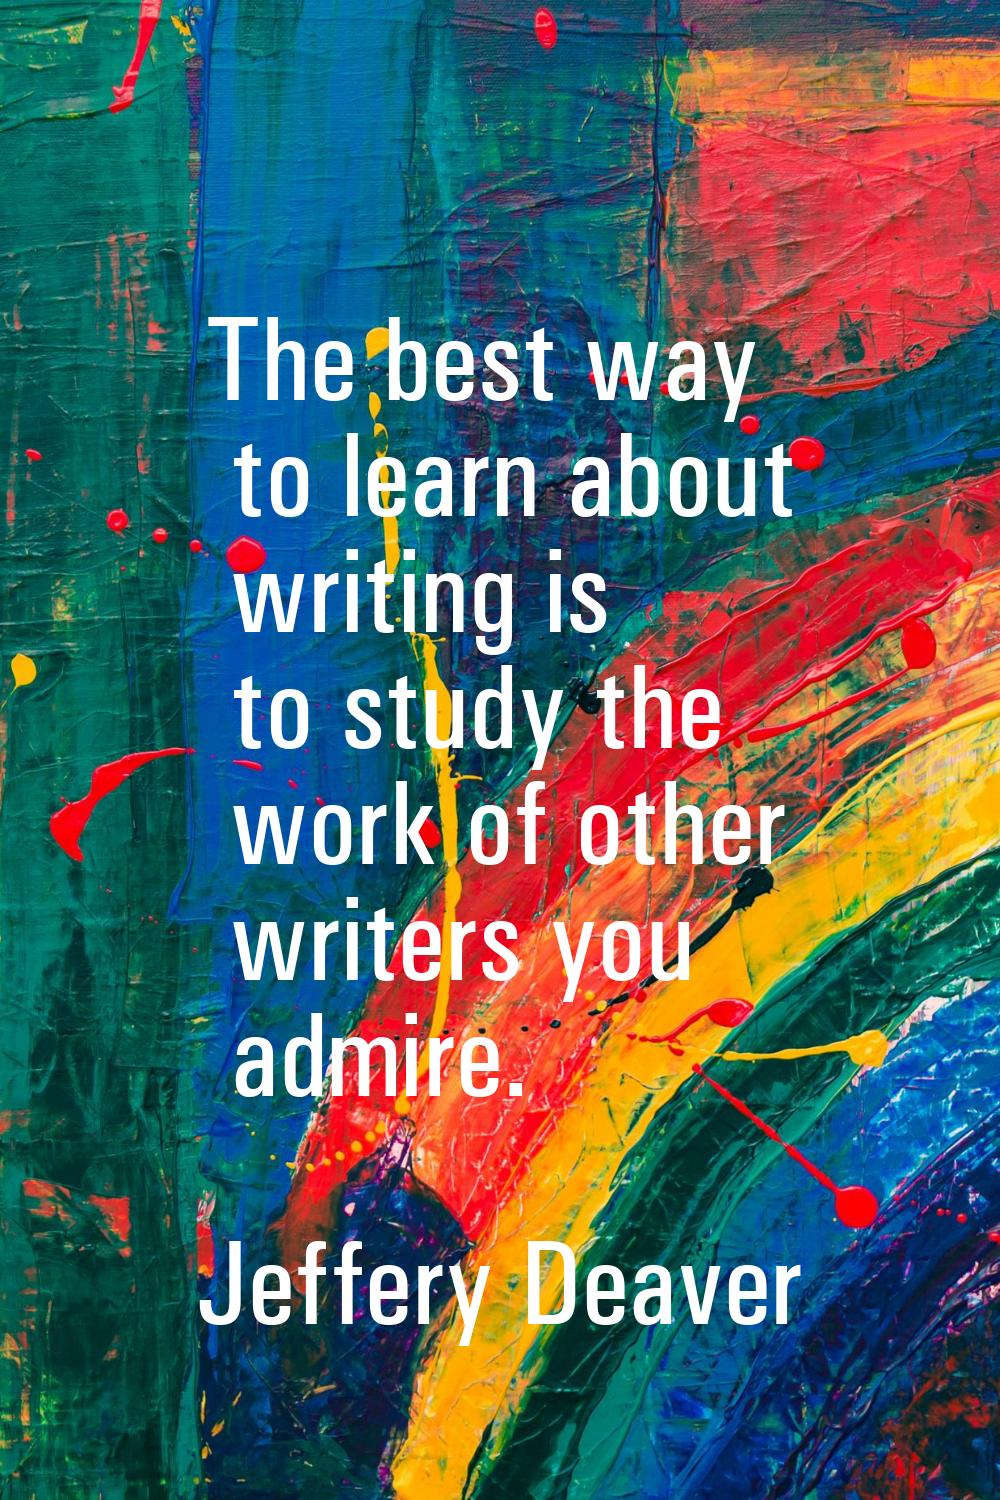 The best way to learn about writing is to study the work of other writers you admire.